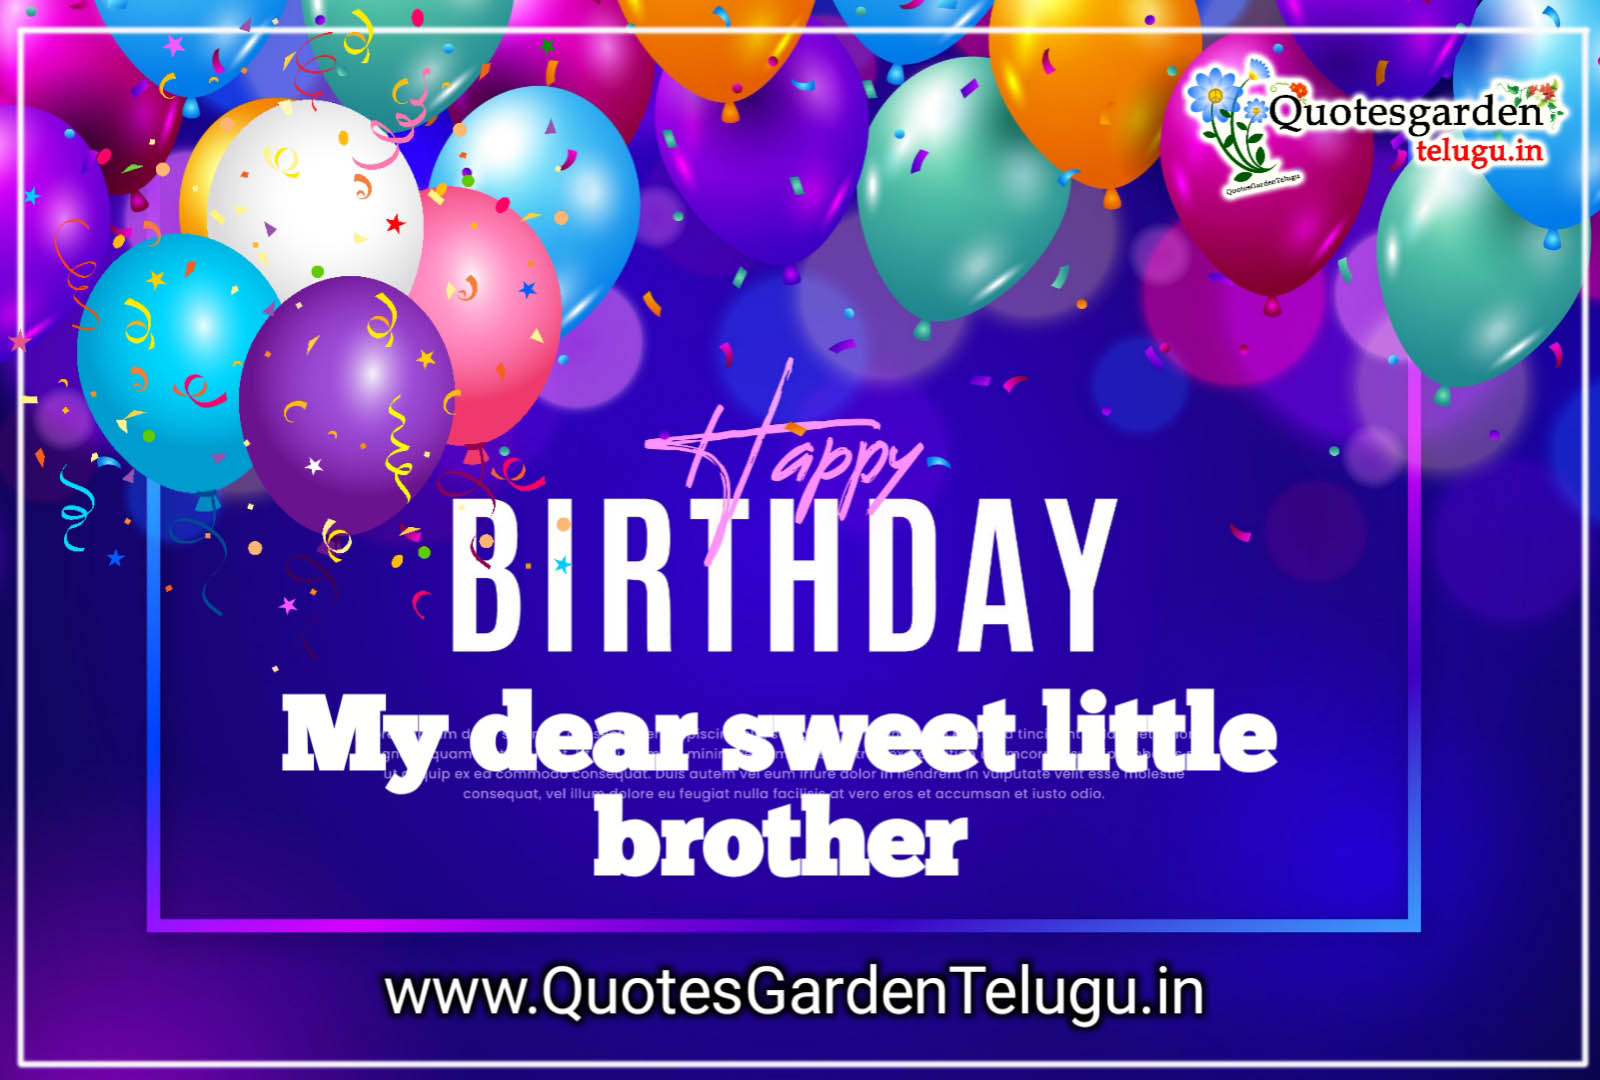 Happy birthday to my little brotherSMS messages for best WhatsApp status |  Like Share Follow